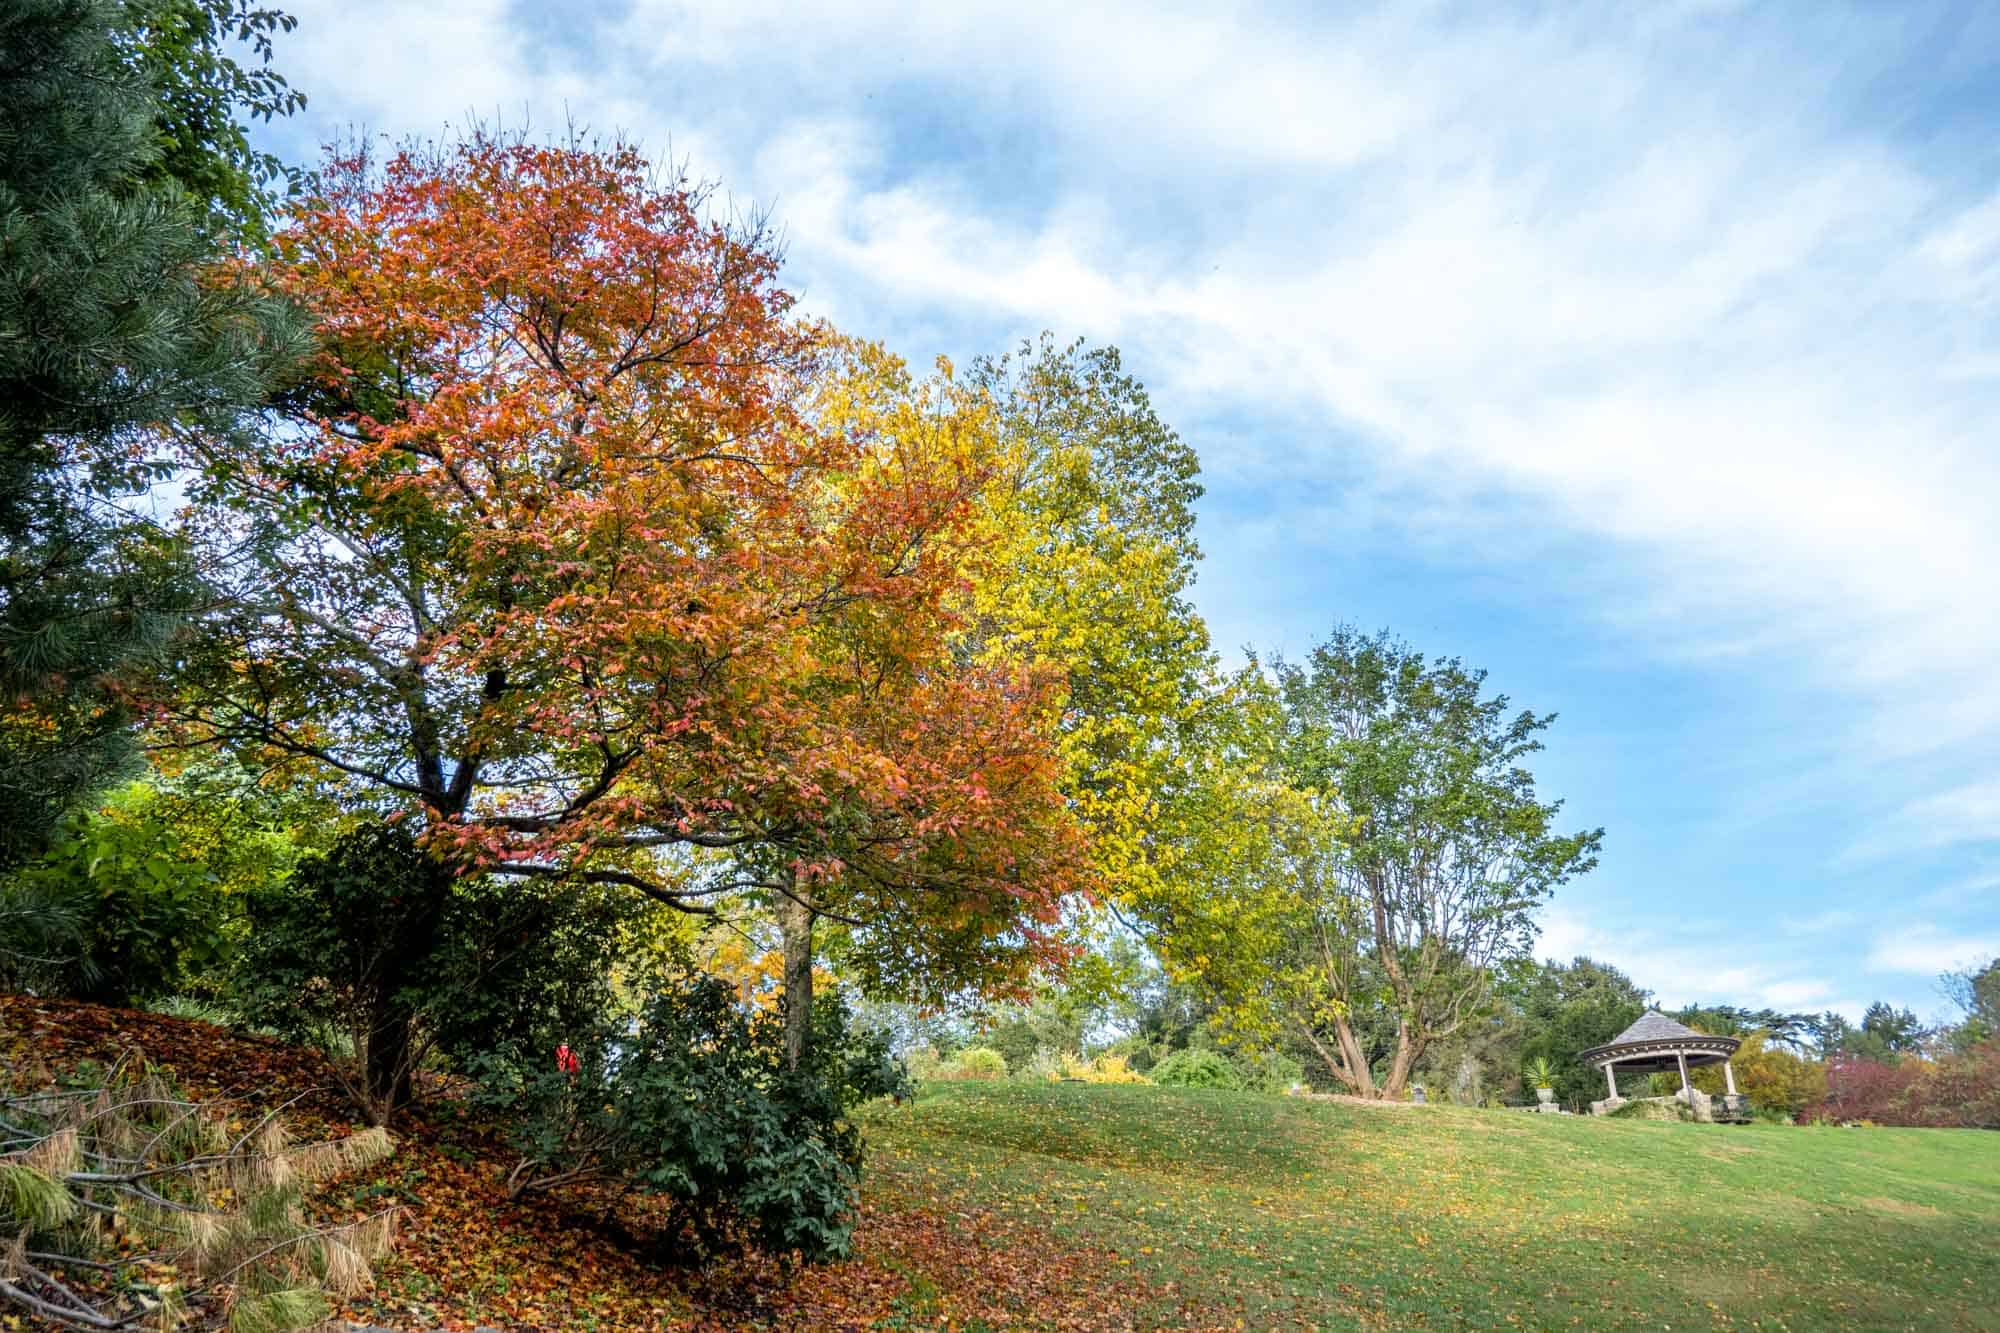 Line of trees with leaves changing in the fall on the top of a hill near a gazebo